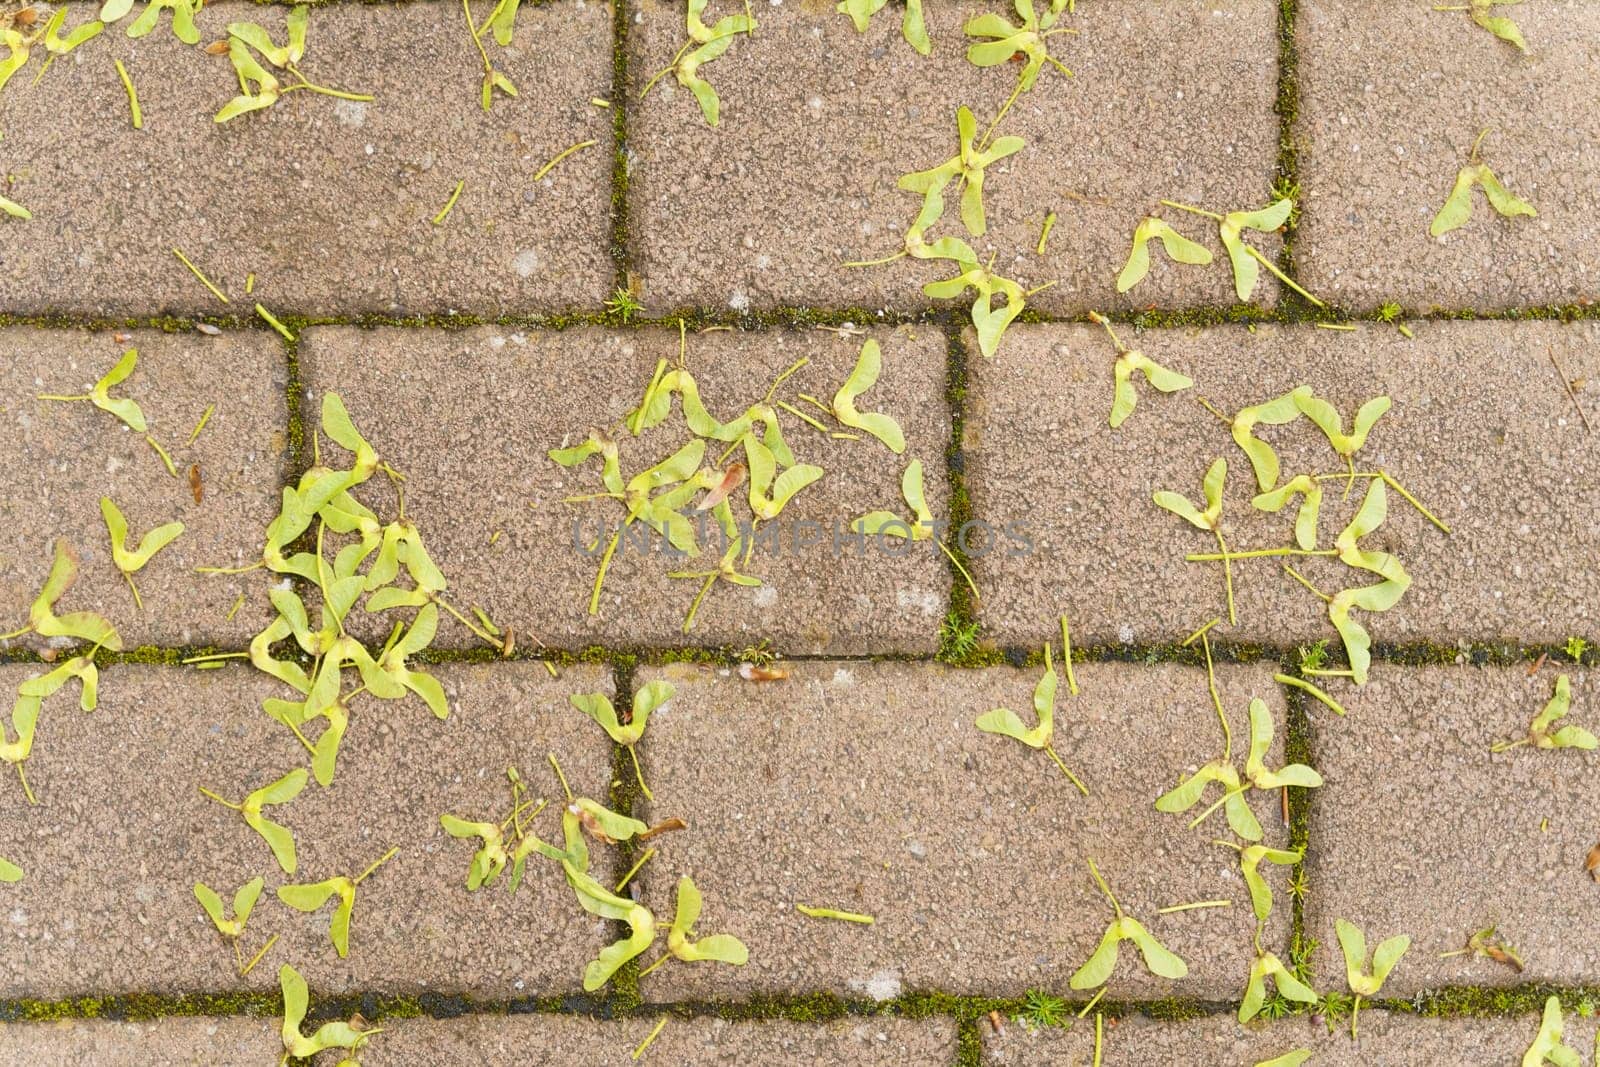 Yellow leaves scattered on a brick walkway. The leaves contrast with the red bricks, creating a vibrant and textured scene perfect for autumn.